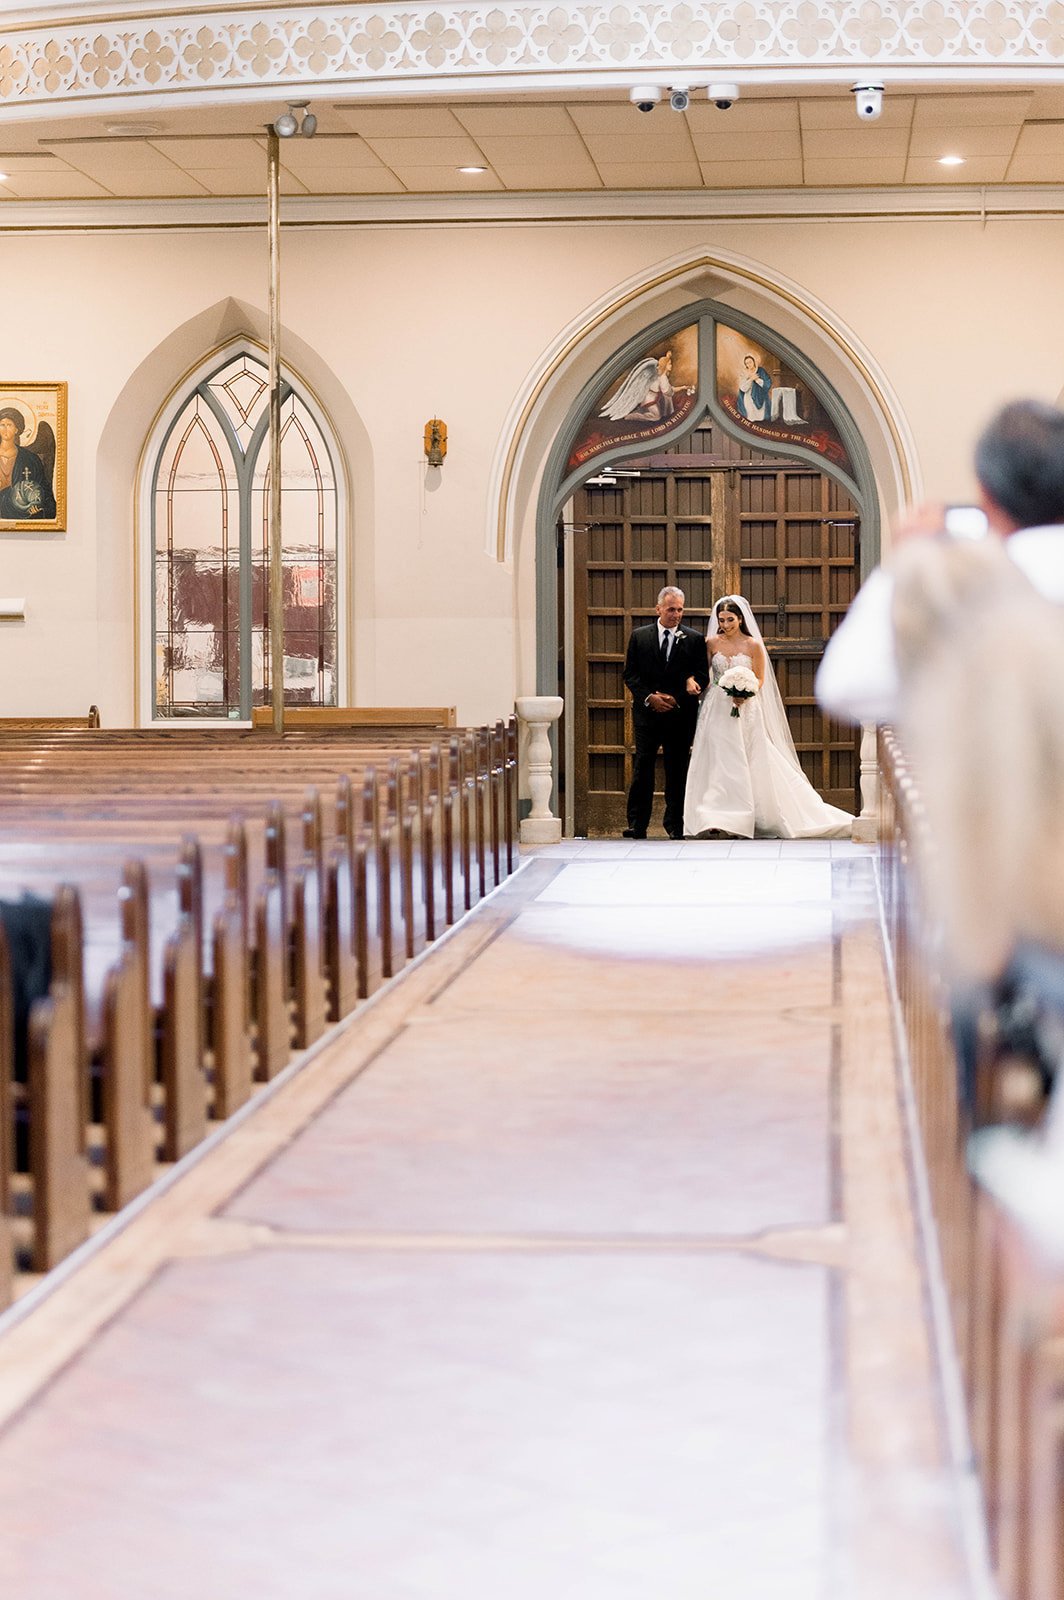 Ballgown wearing bride is escorted down long church aisle by father in Hart House Wedding.